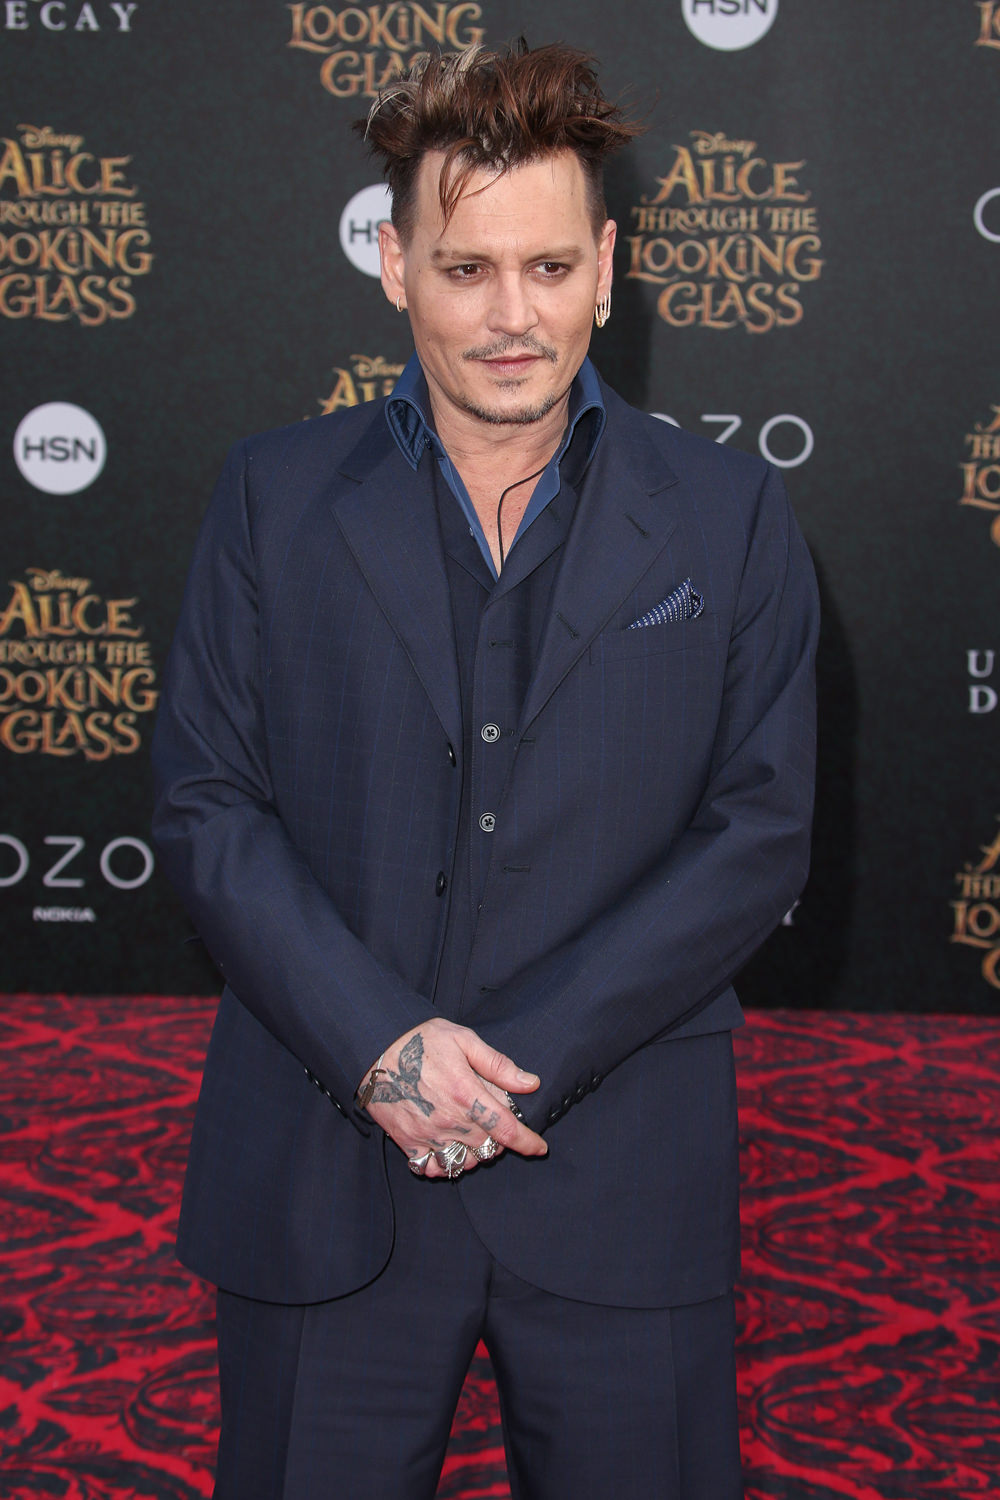 Johnny-Depp-Alice-Through-The-Looking-Glass-Red-Carpet-Fashion-Tom-Lorenzo-Site (1)